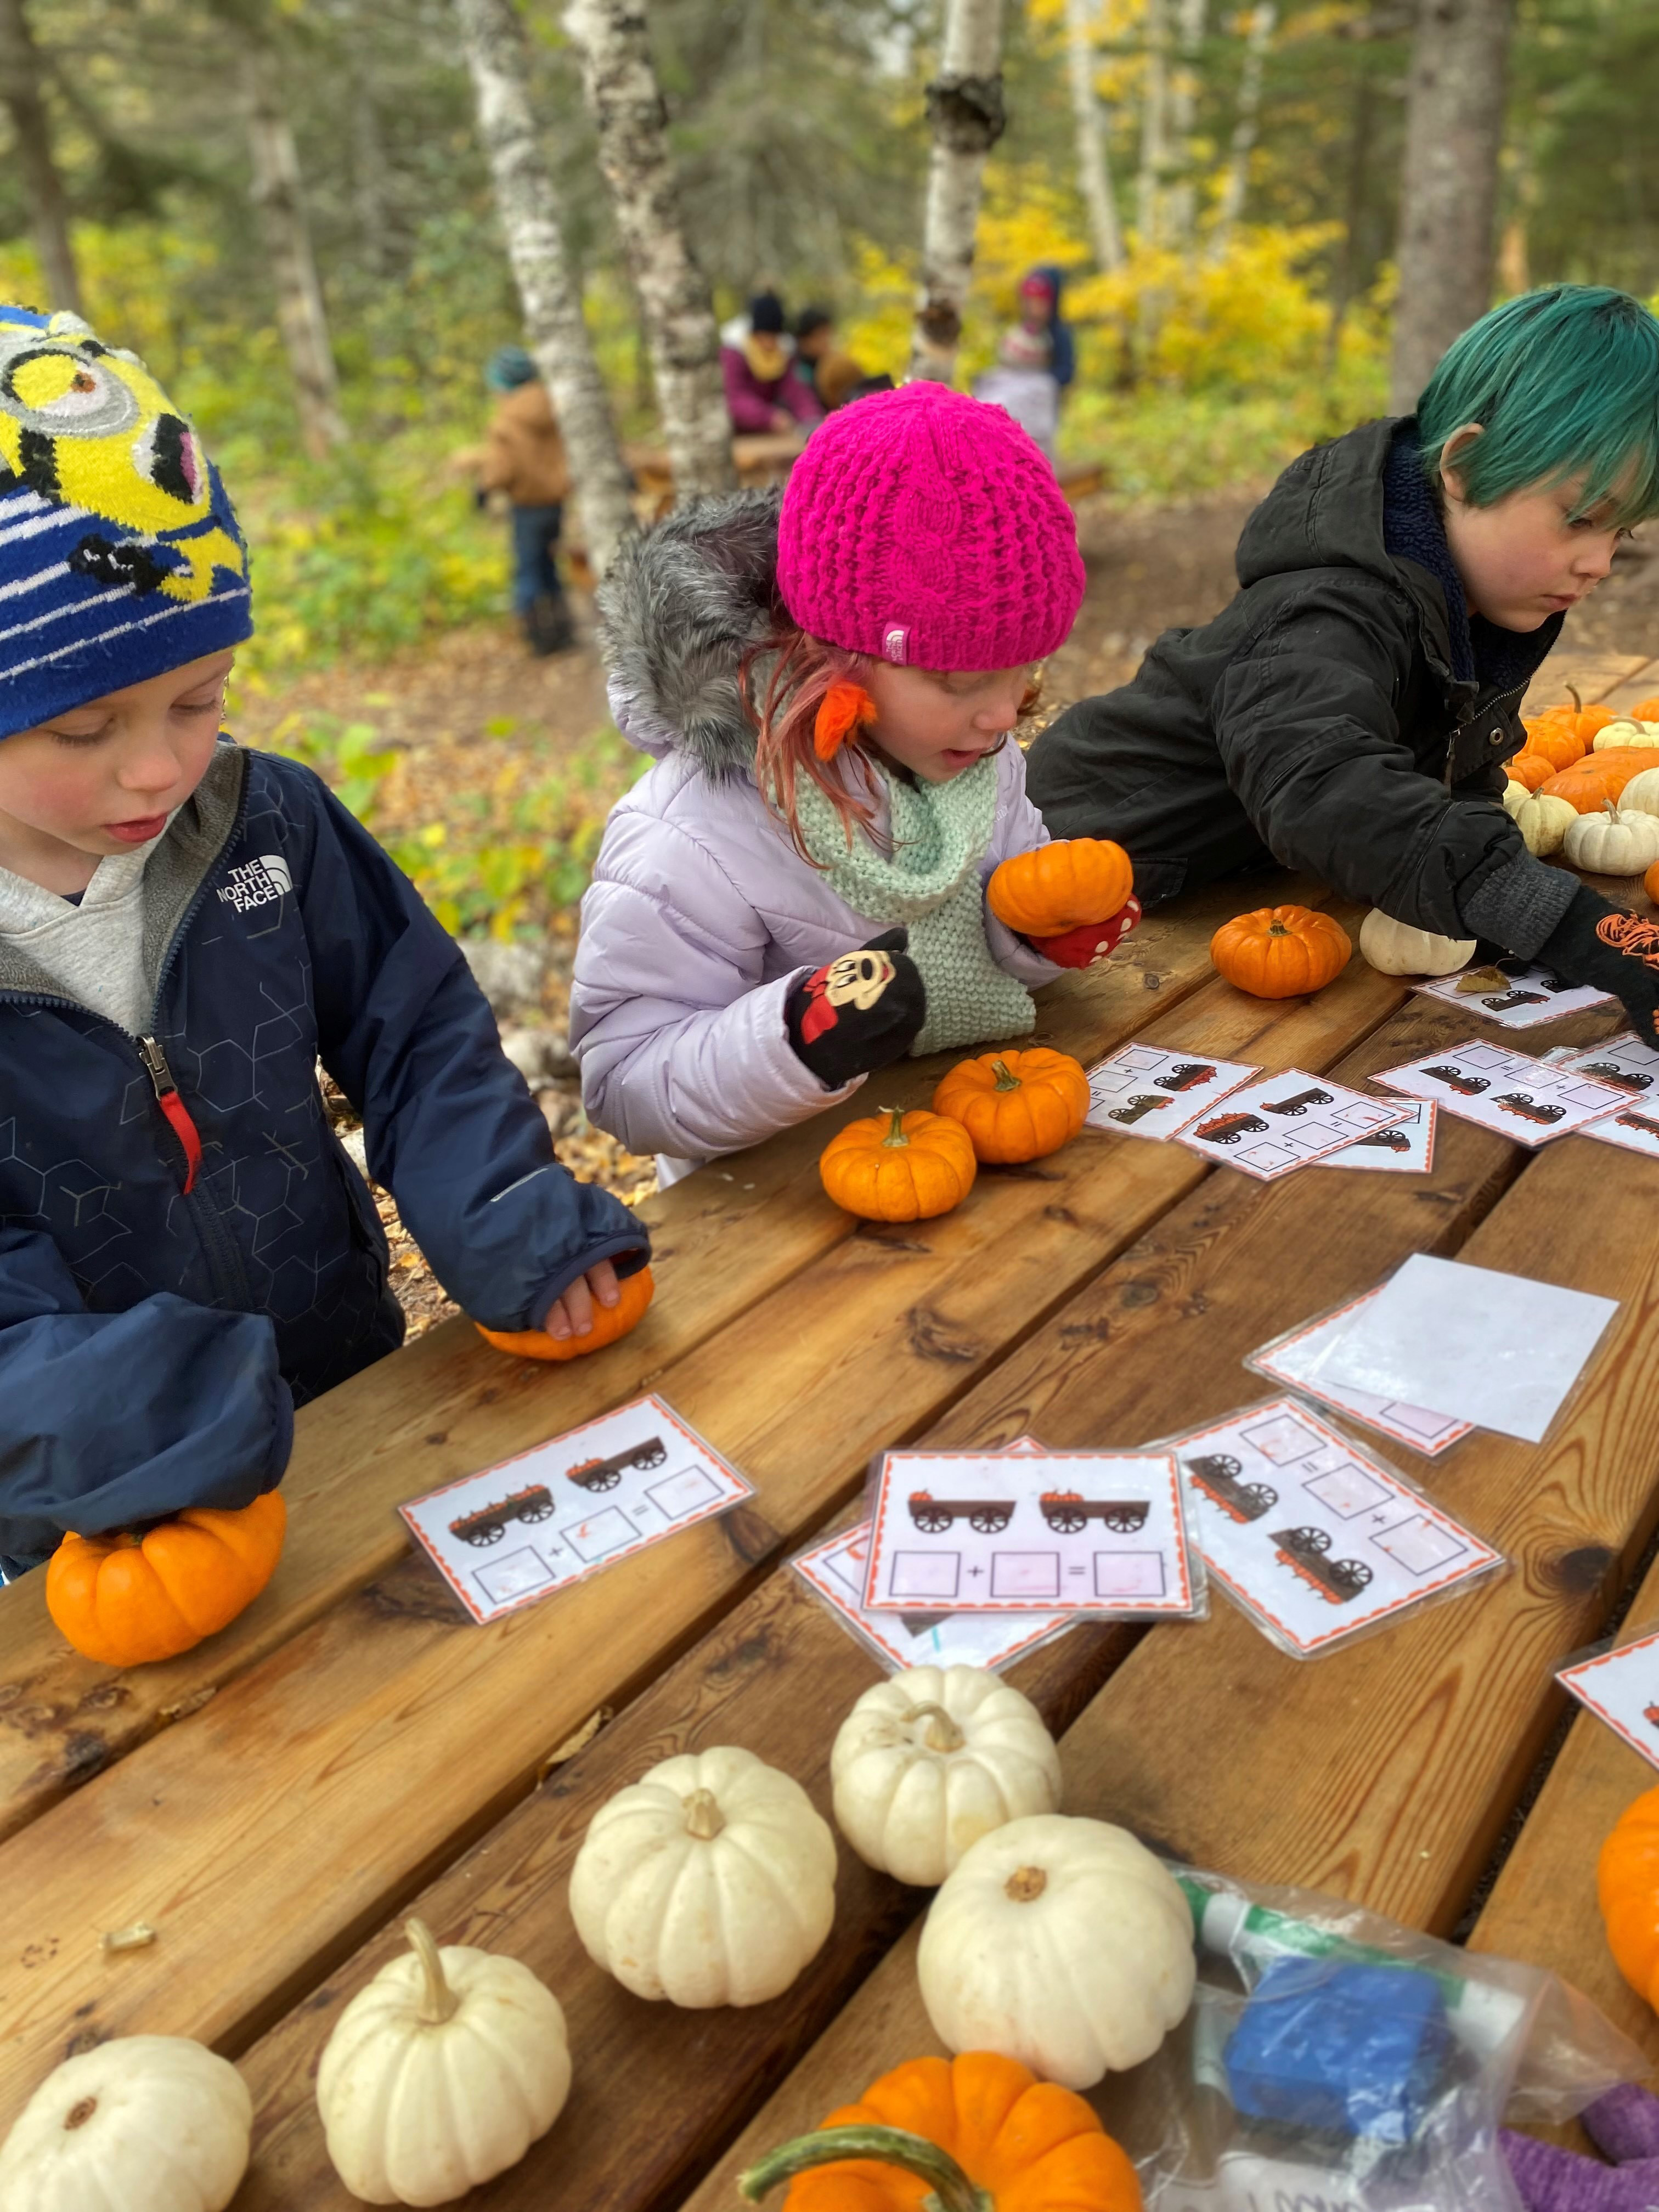 Students working with pumpkins at outdoor table